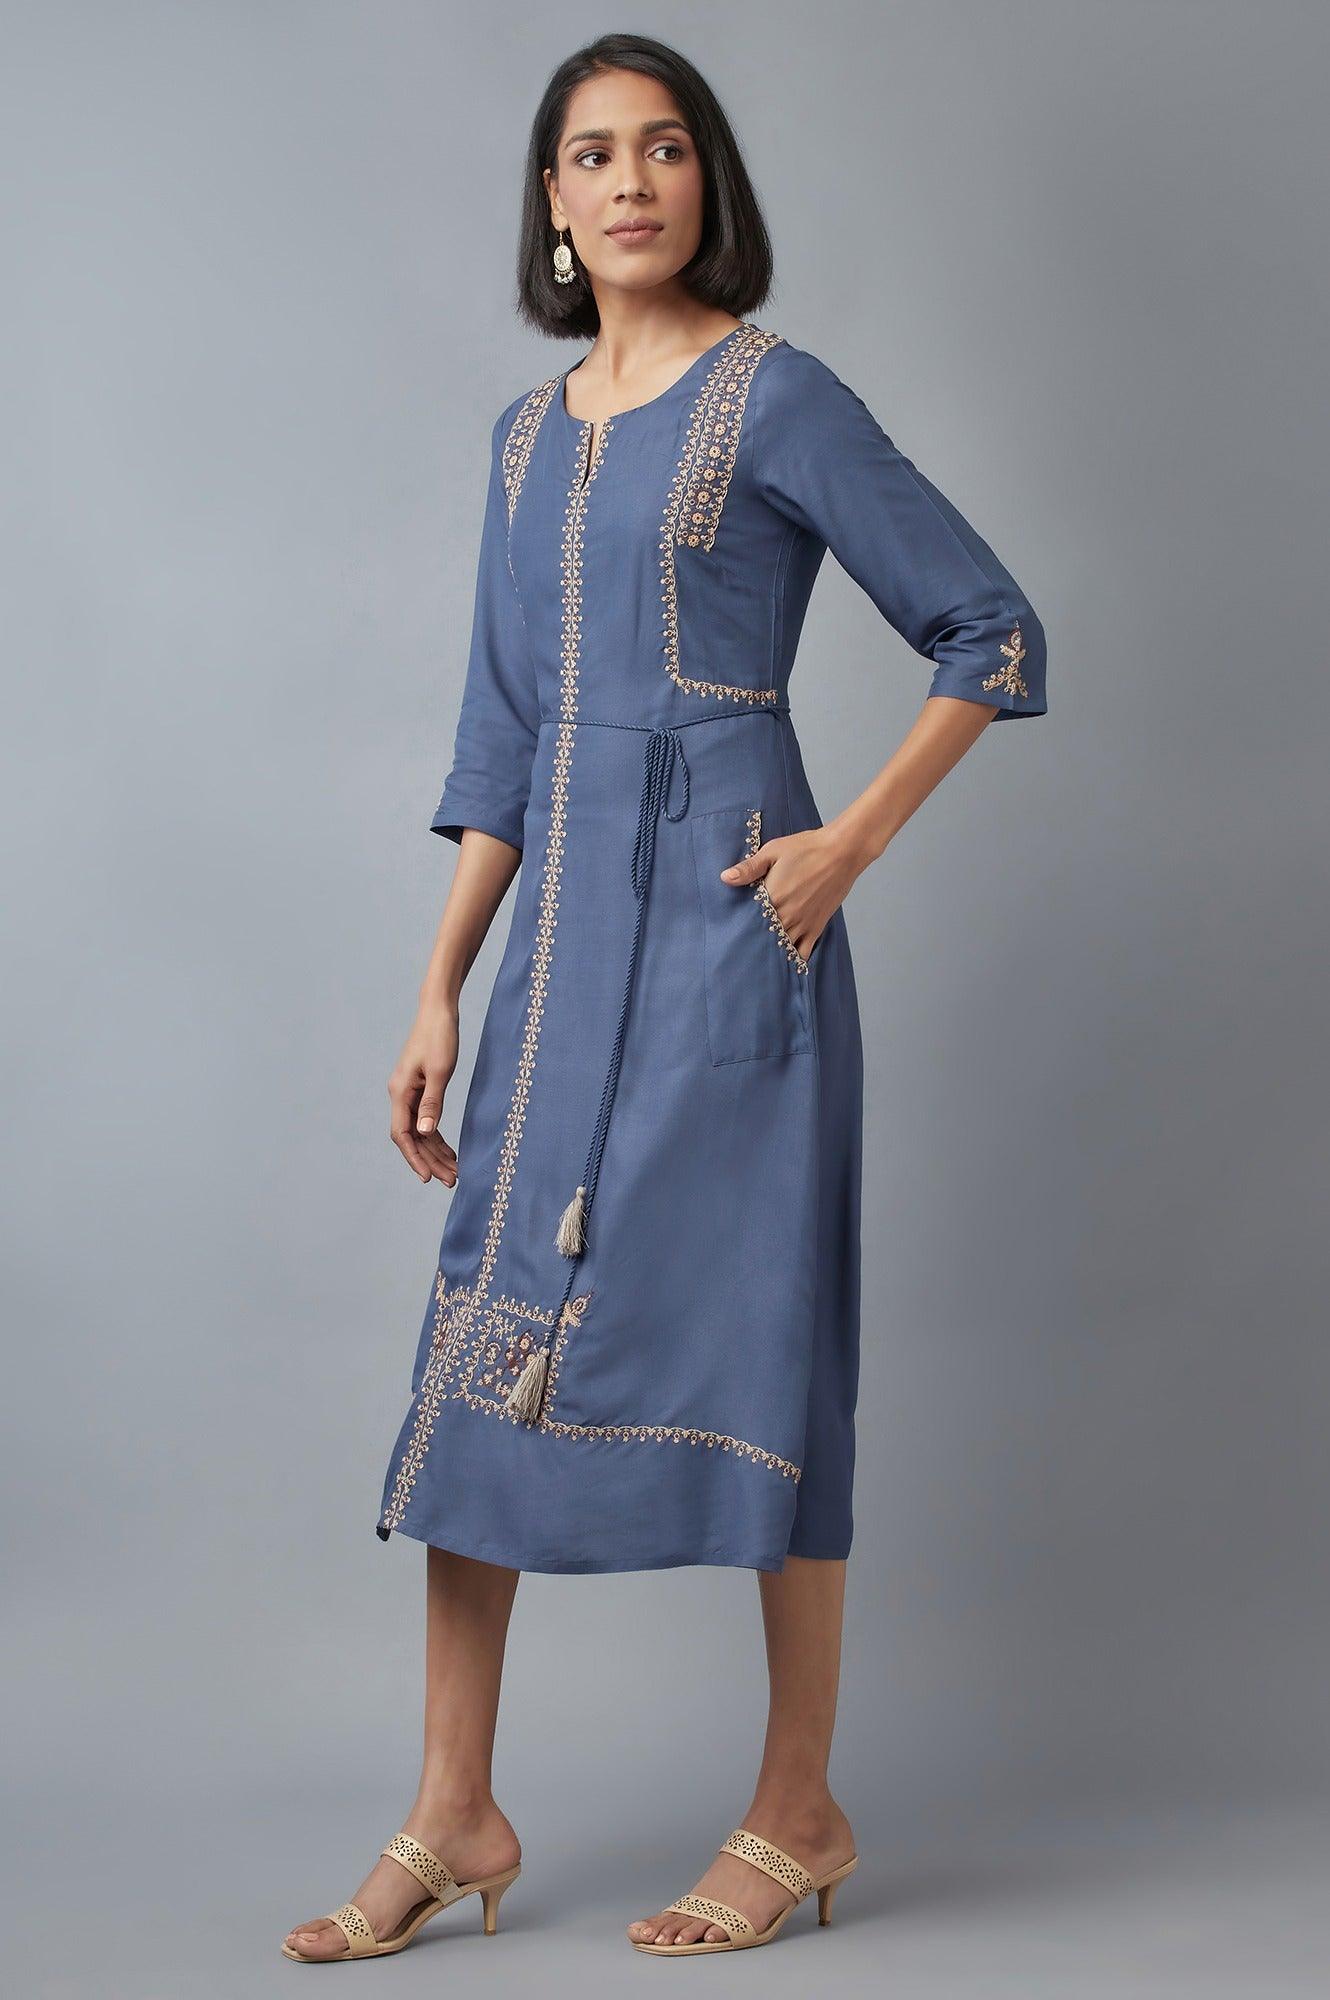 Steel Blue Embroidered Dress - wforwoman